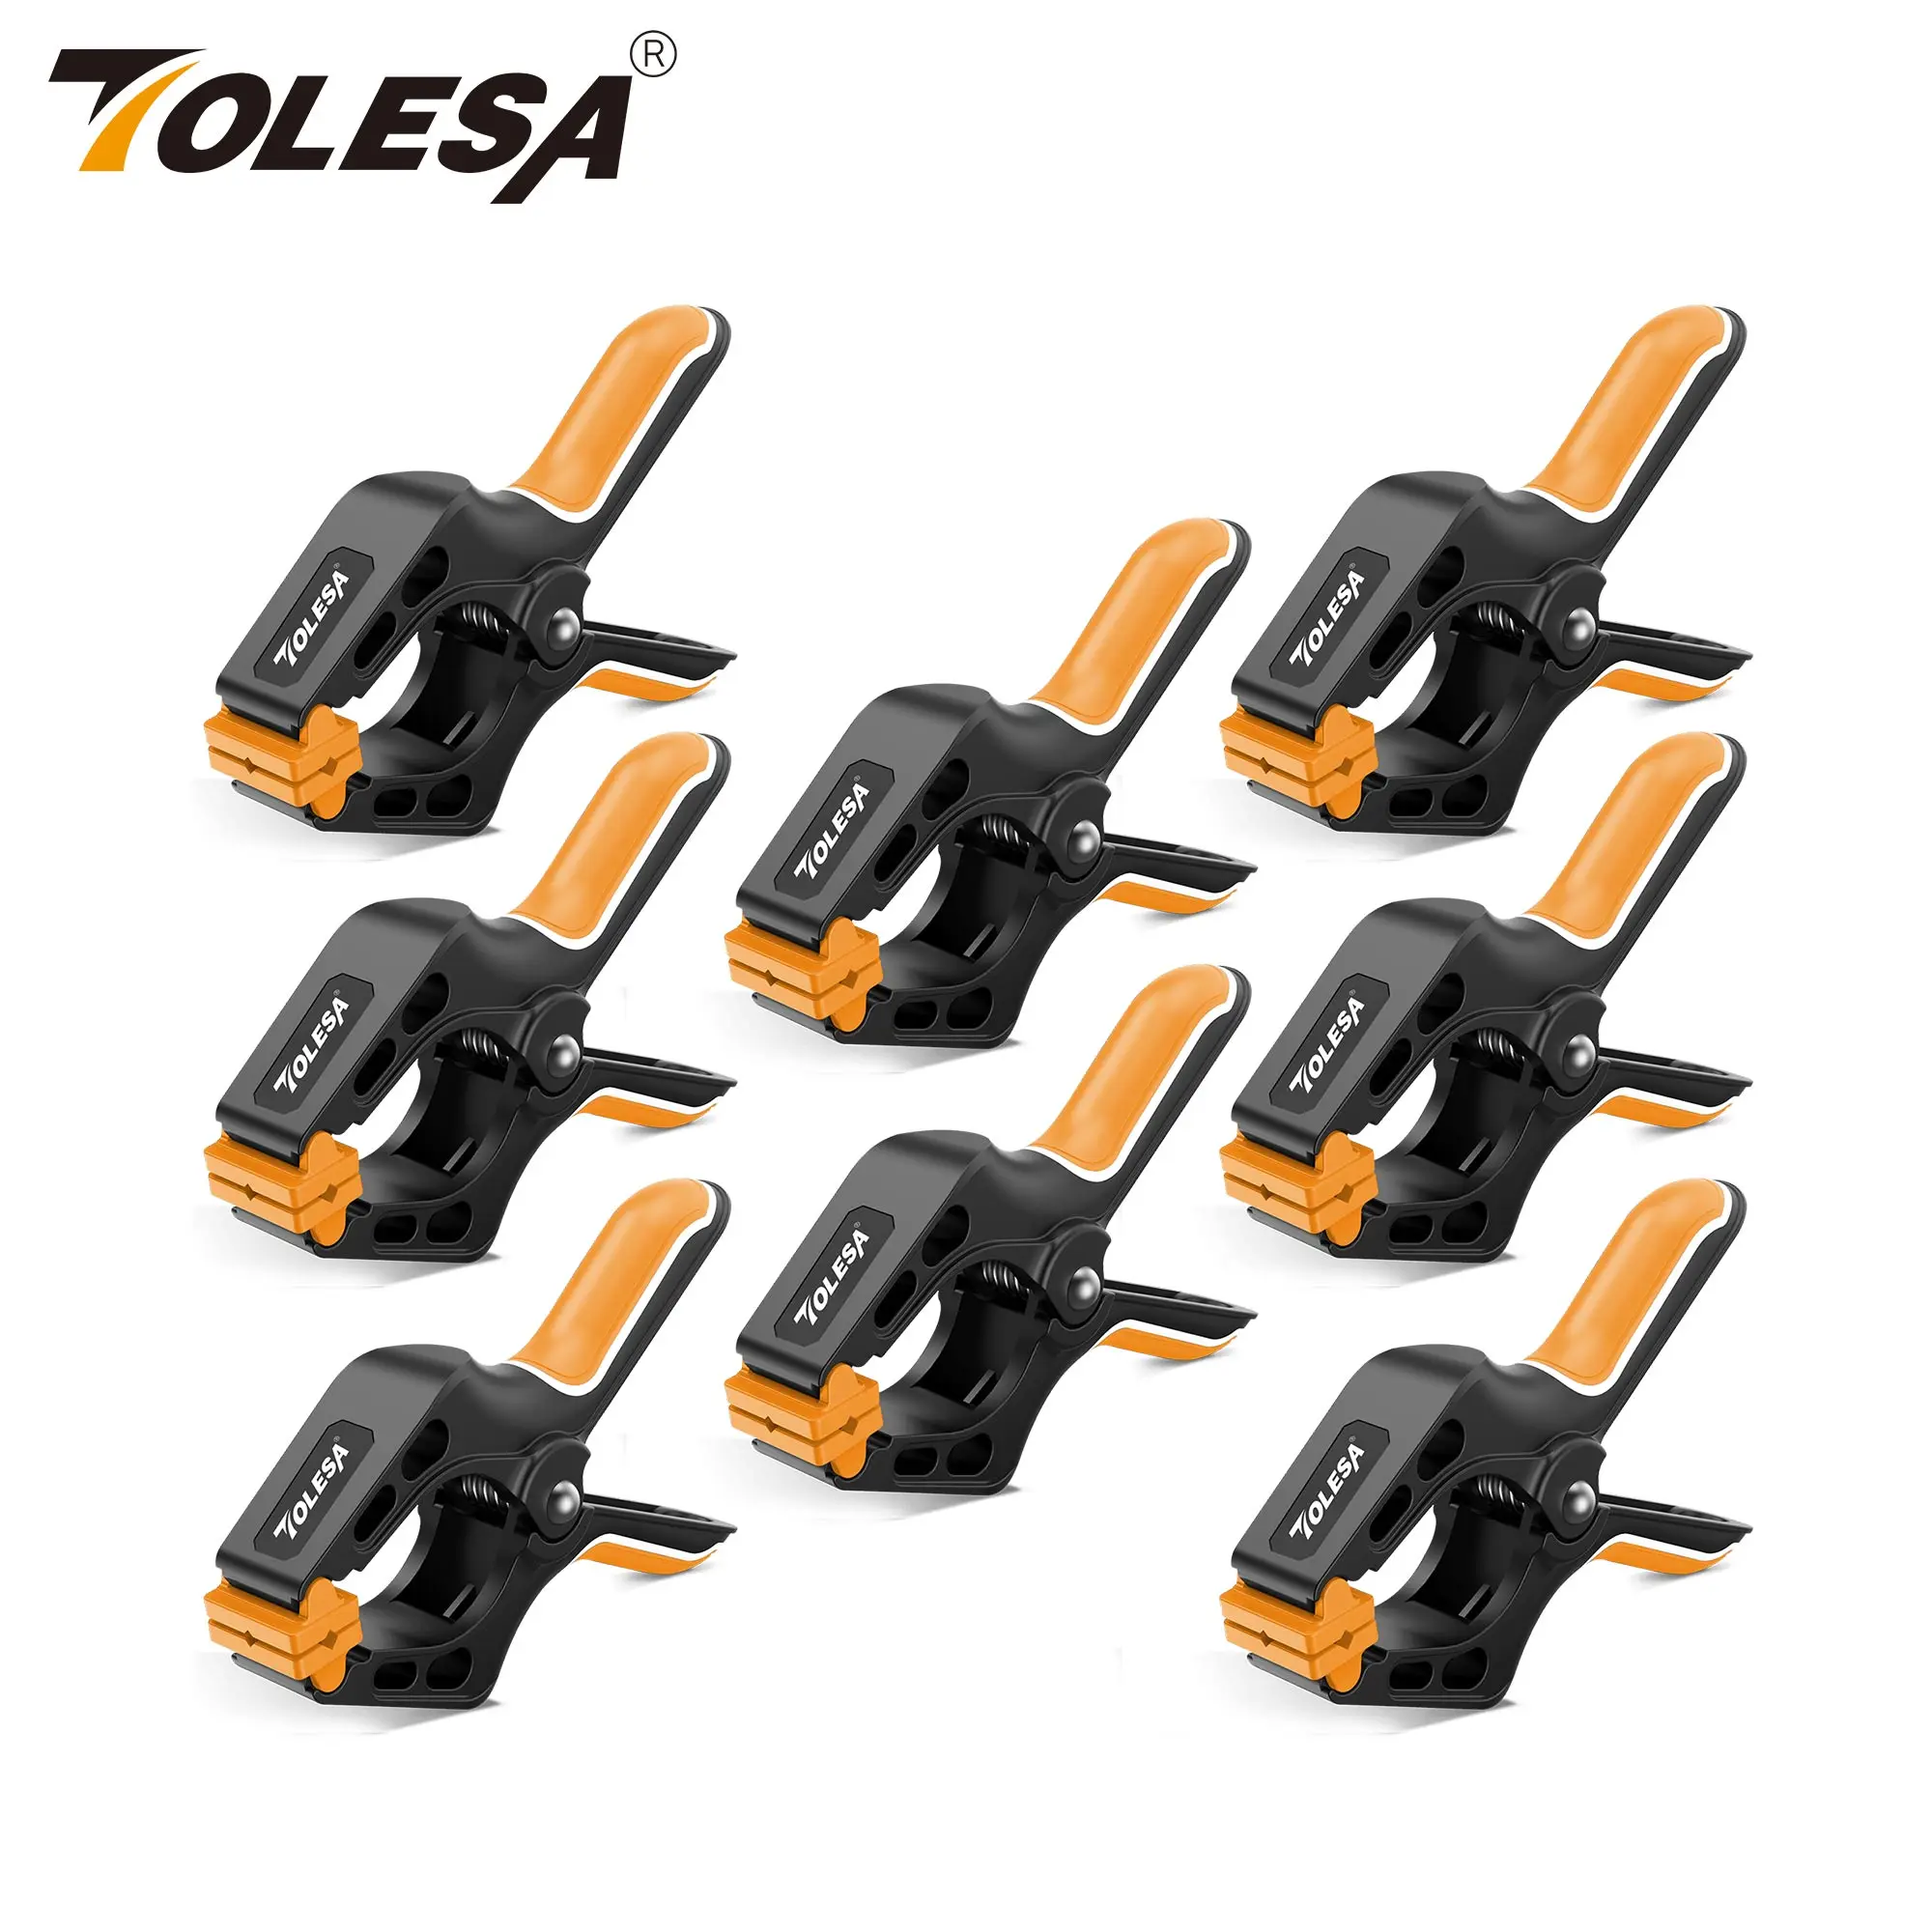 

TOLESA 4" Spring Clamps for Woodworking Powerful Force 8PCS Nylon Clamp with Double Layer Handle for Gluing, Clamping, Securing